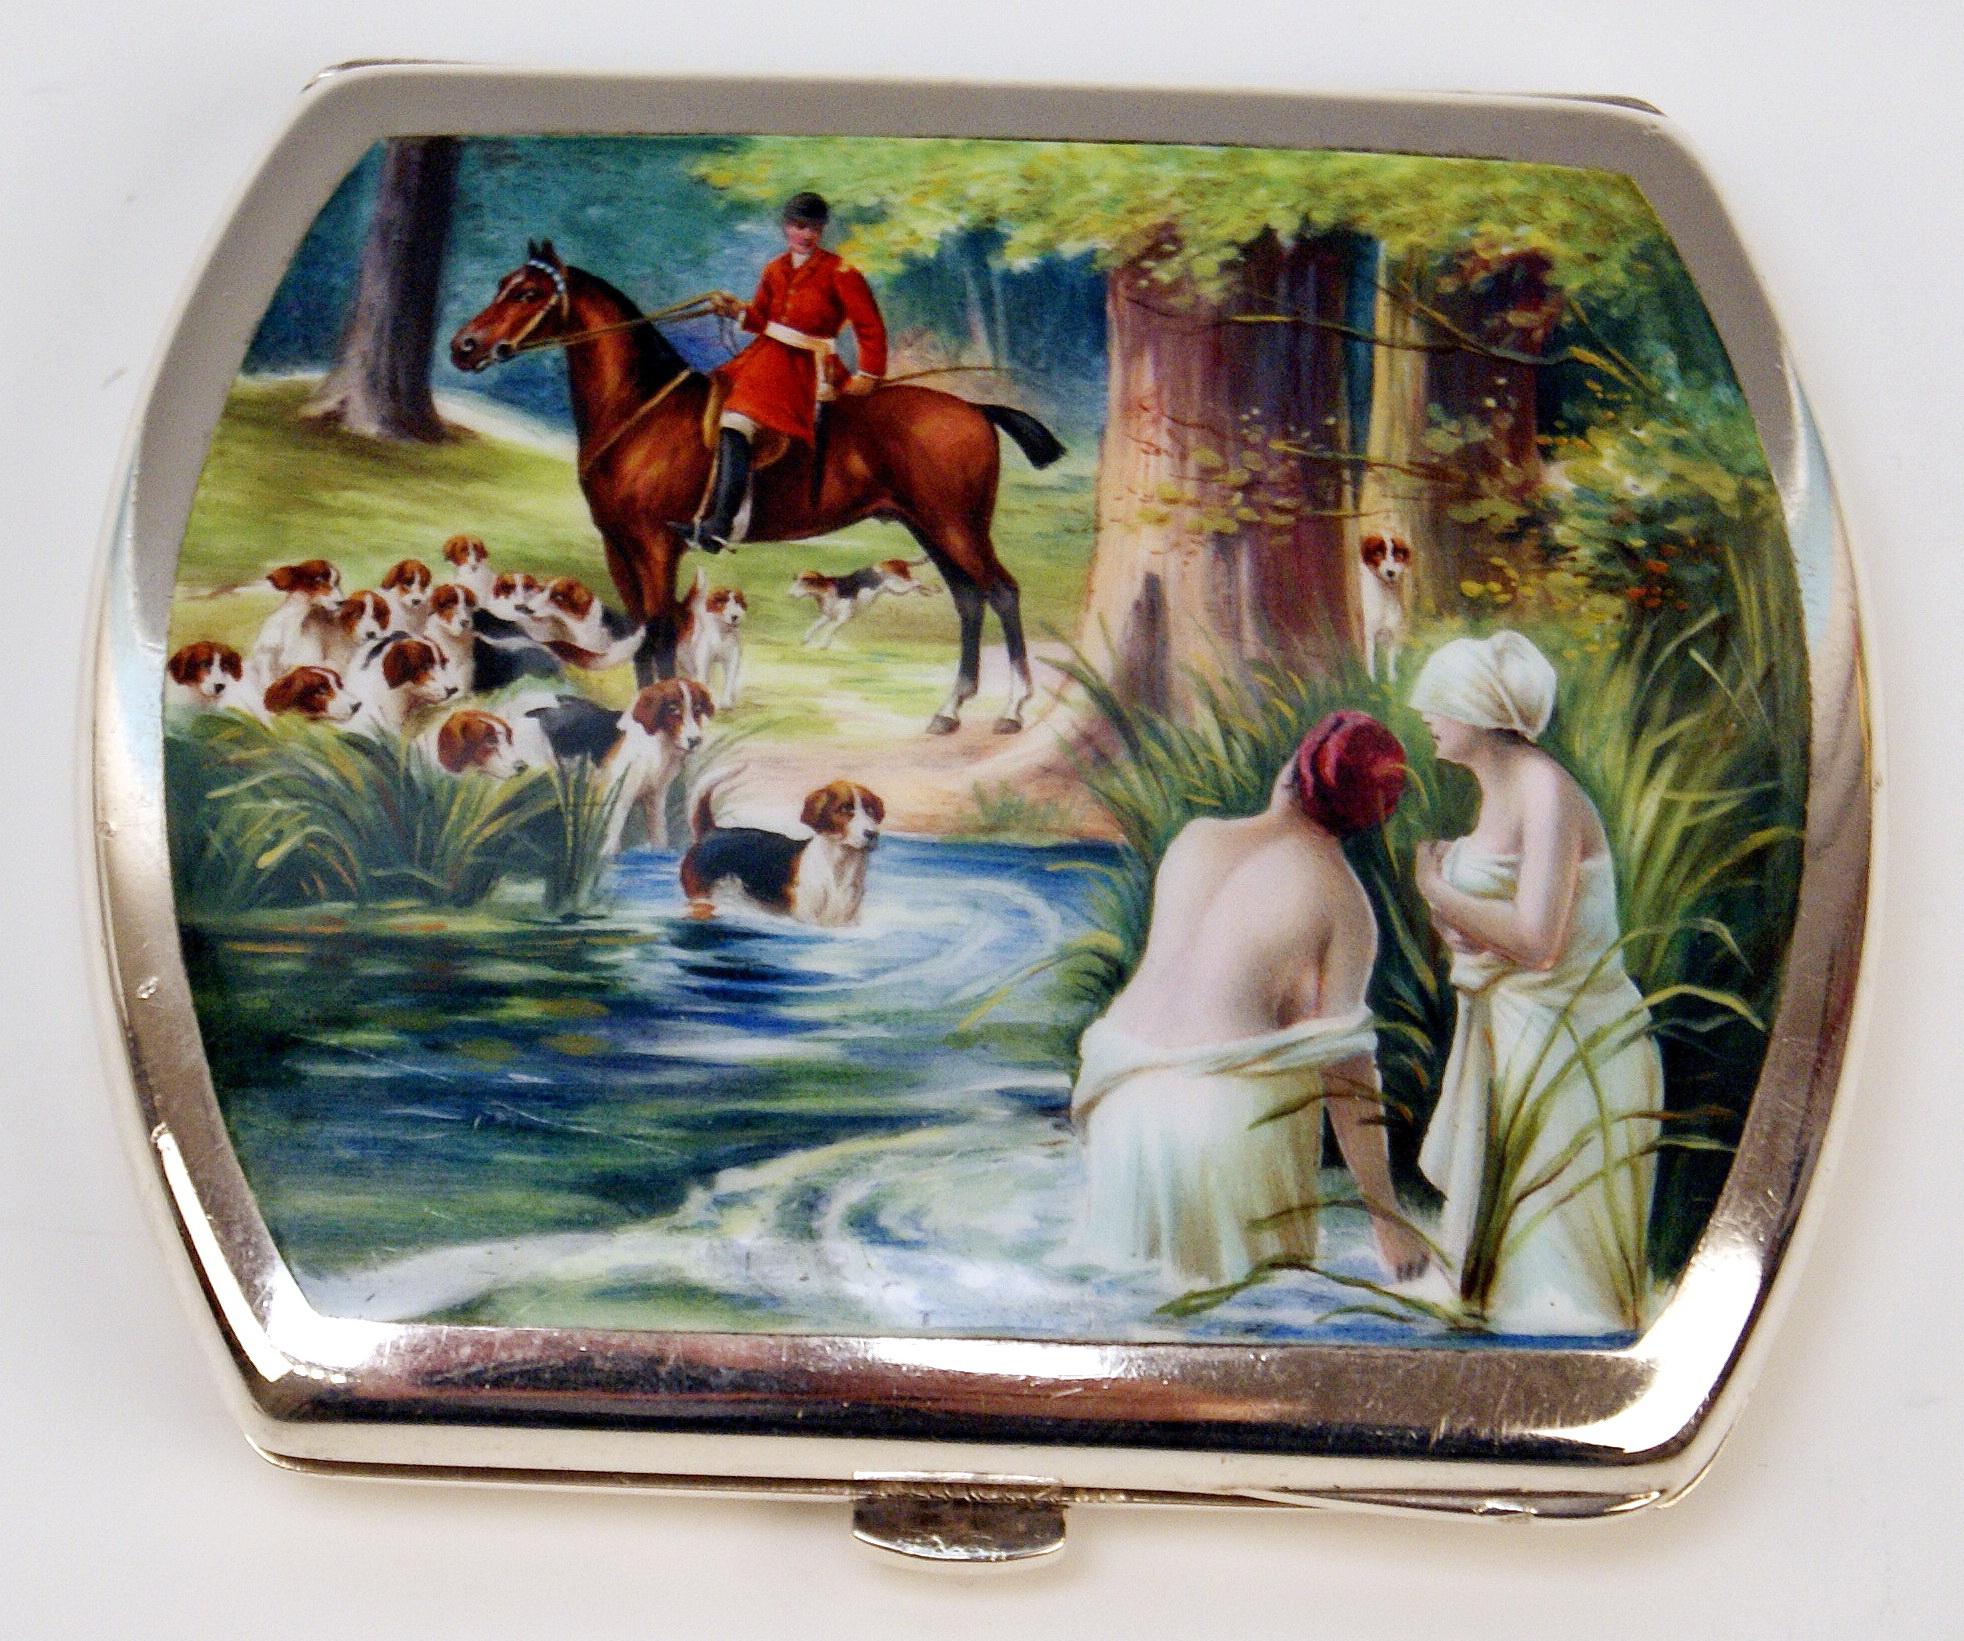 Stunning silver 835 cigarette box / case with enamel painting covering lid:
View of bathing ladies who are observed by huntsman on horseback.

The lid is decorated with a most interesting enamel picture as mentioned above:
There is a pond